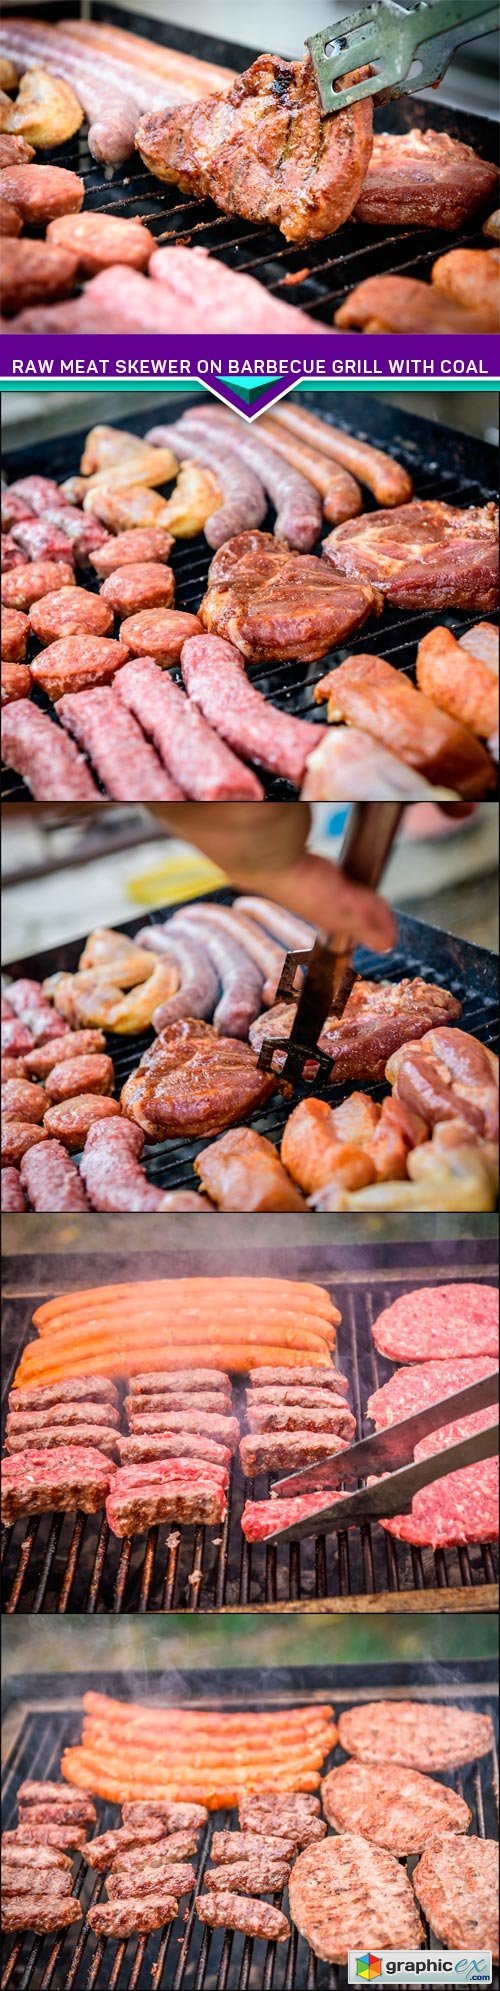 Raw Meat skewer on barbecue grill with coal 5x JPEG